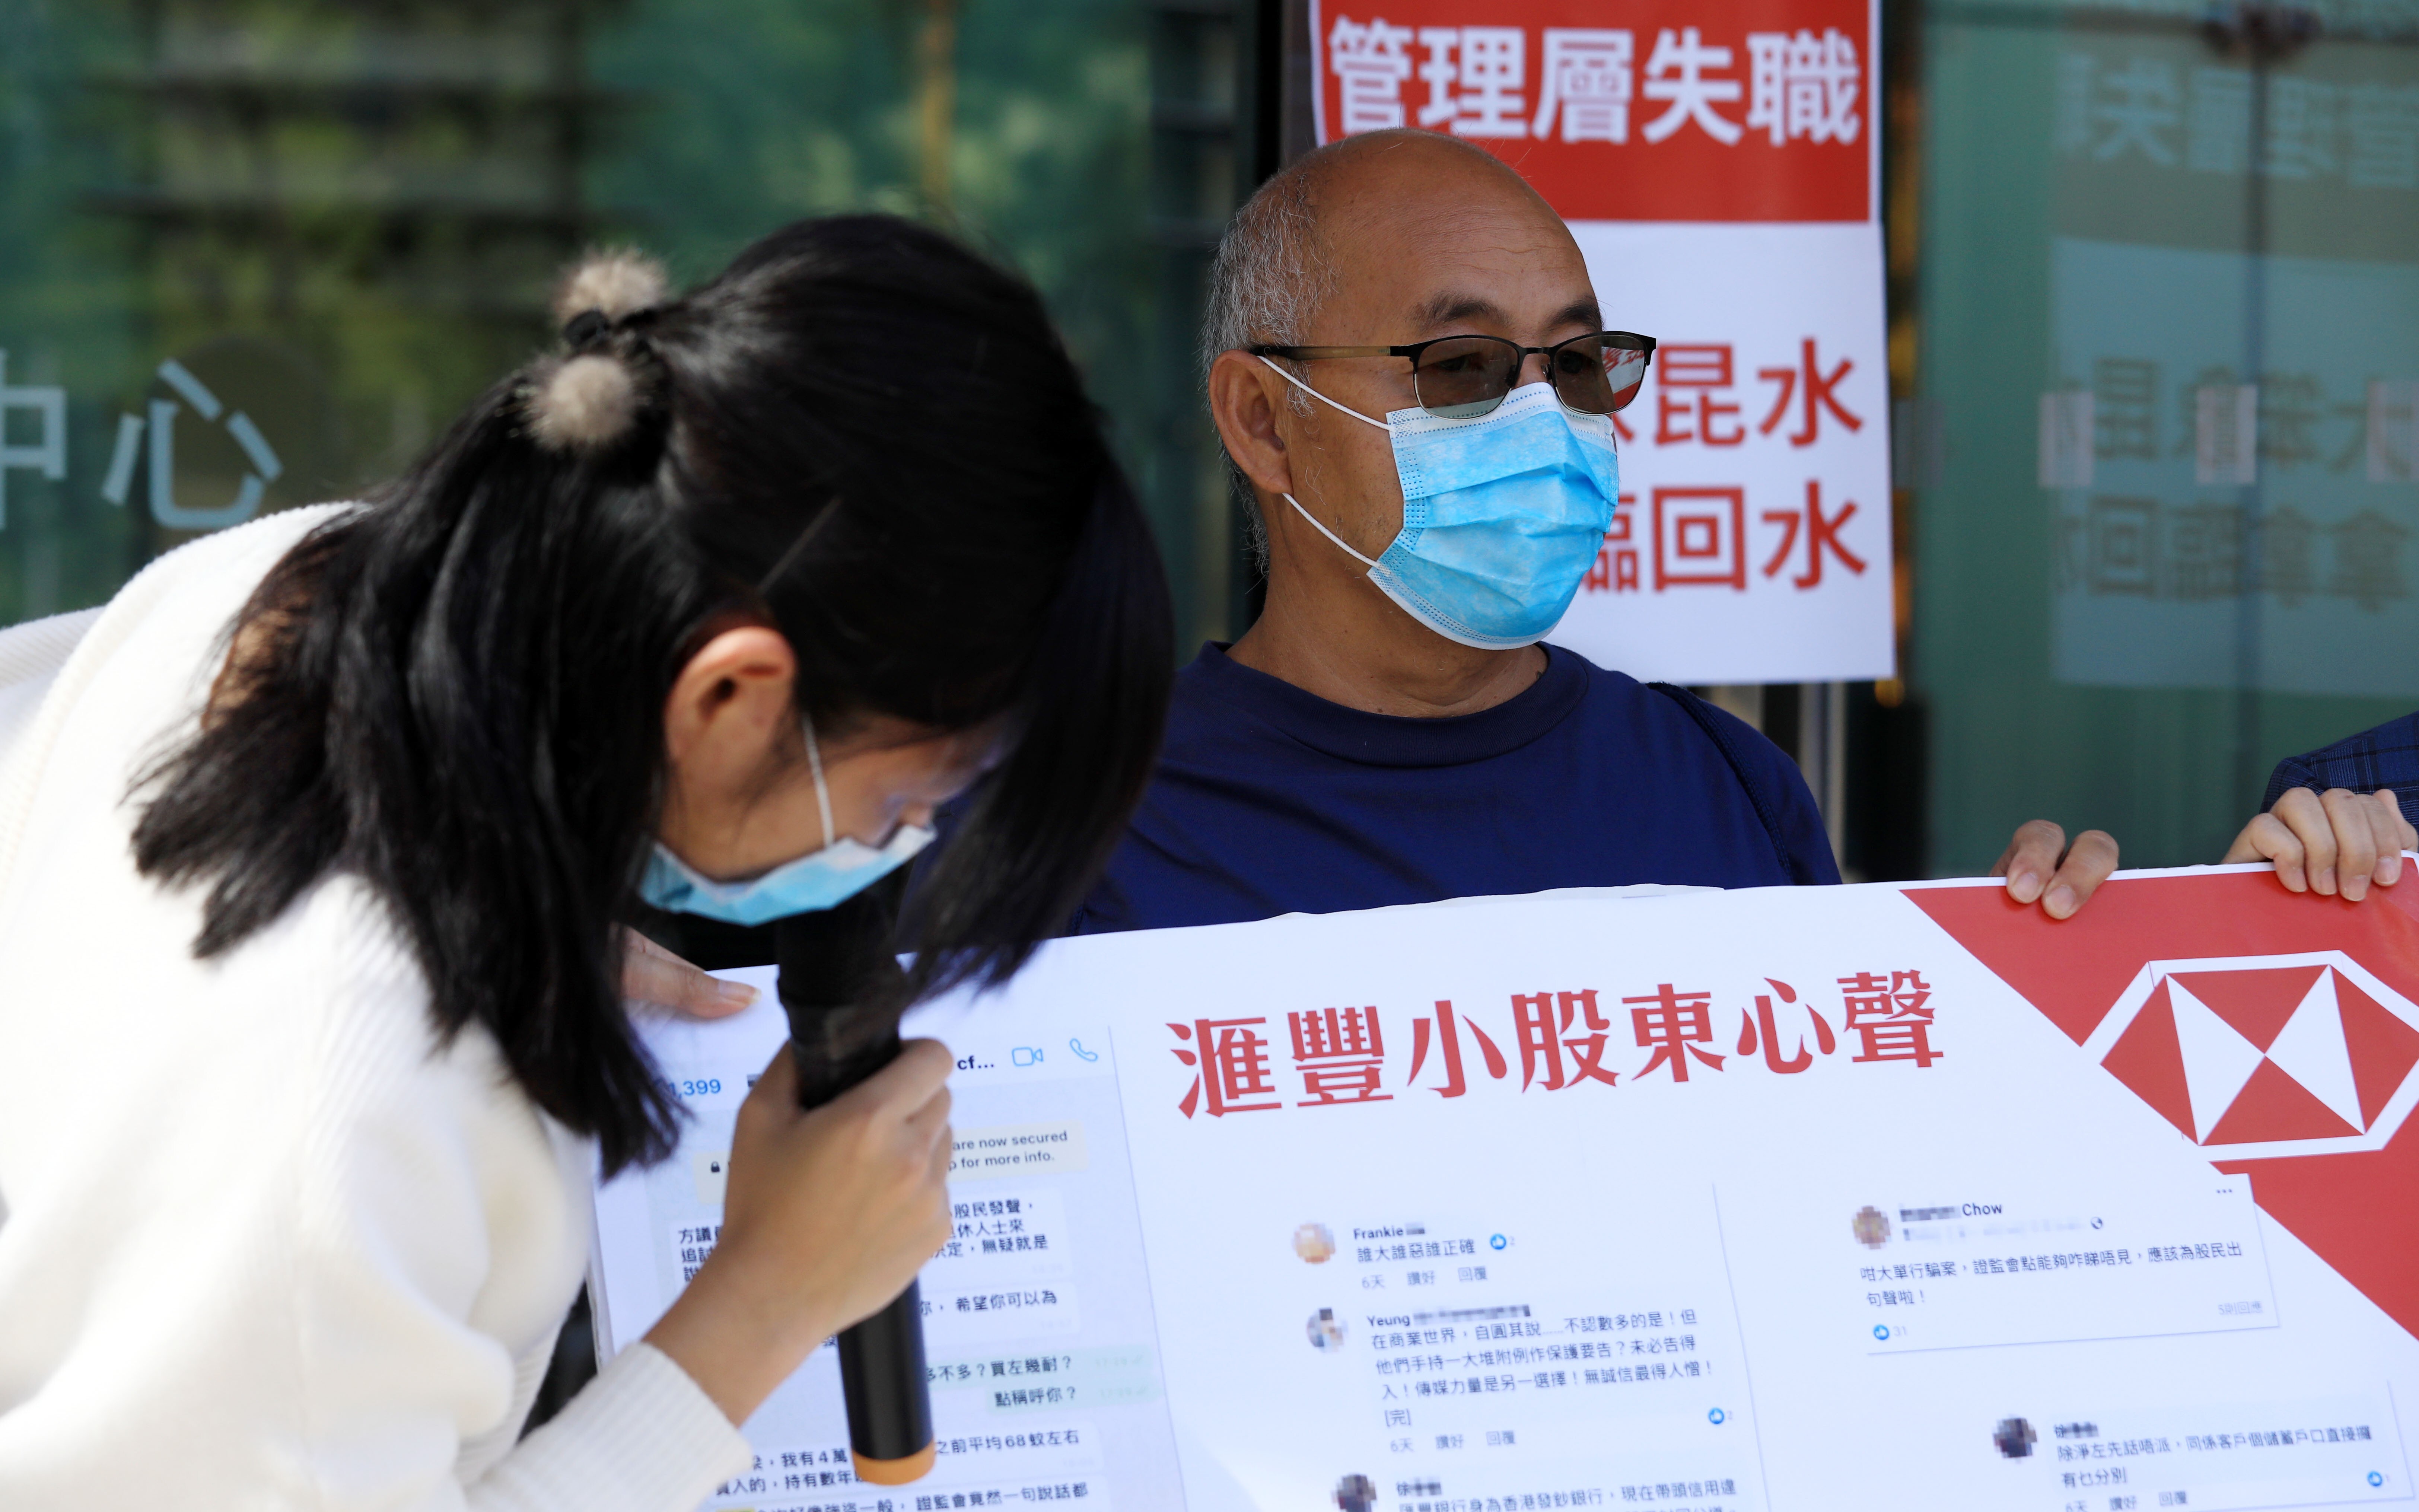 HSBC shareholders attend a protest in Hong Kong’s Central district in the this file photo from April 16, 2020. Photo: May Tse